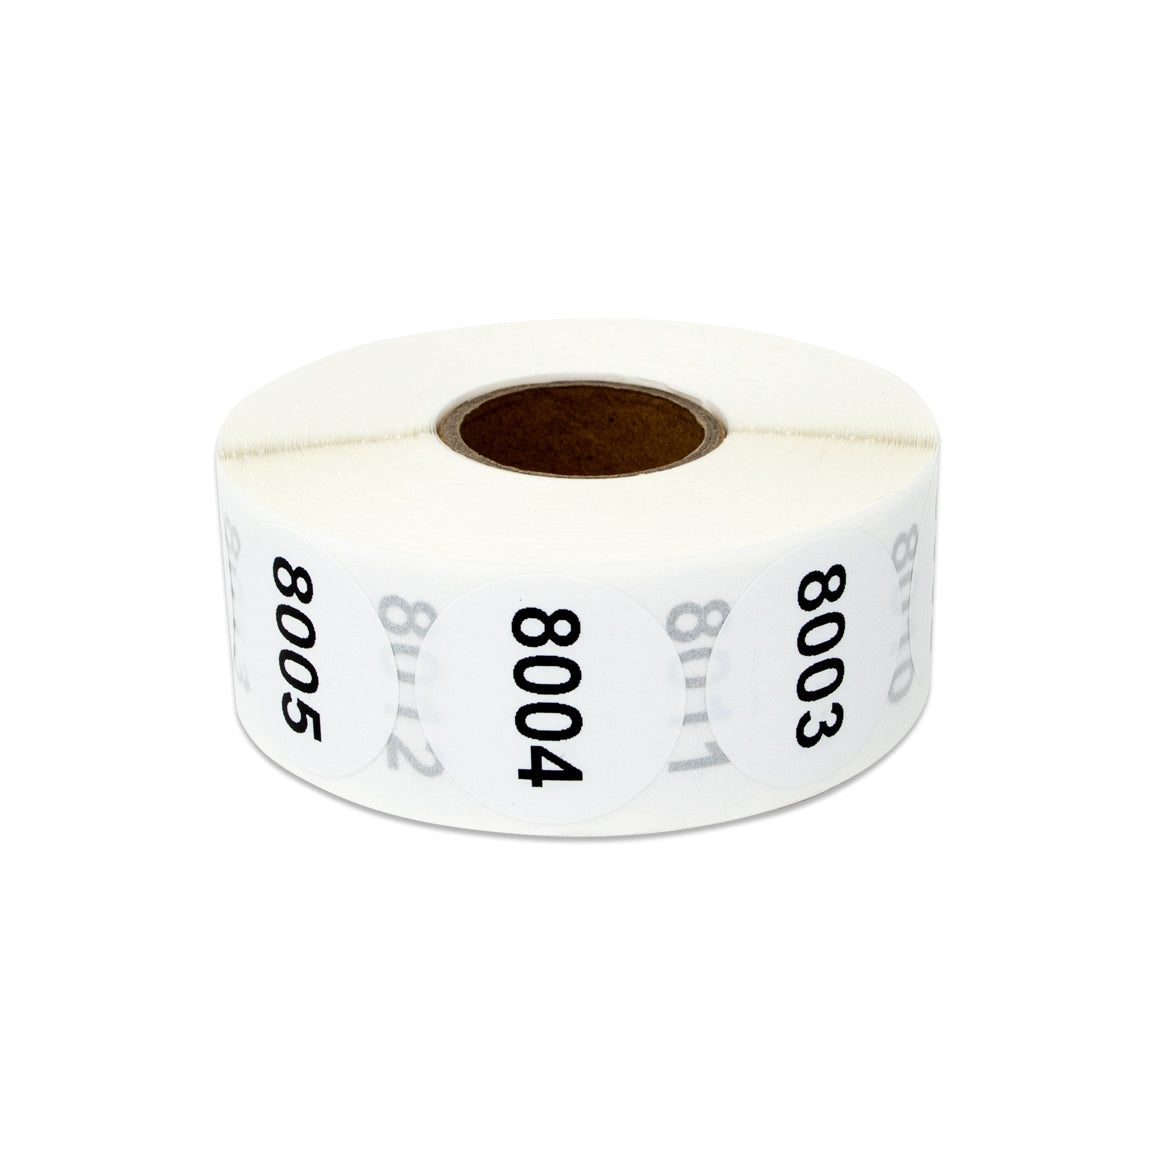 1 inch | Inventory: Consecutive Numbers "8001 to 9000" Stickers